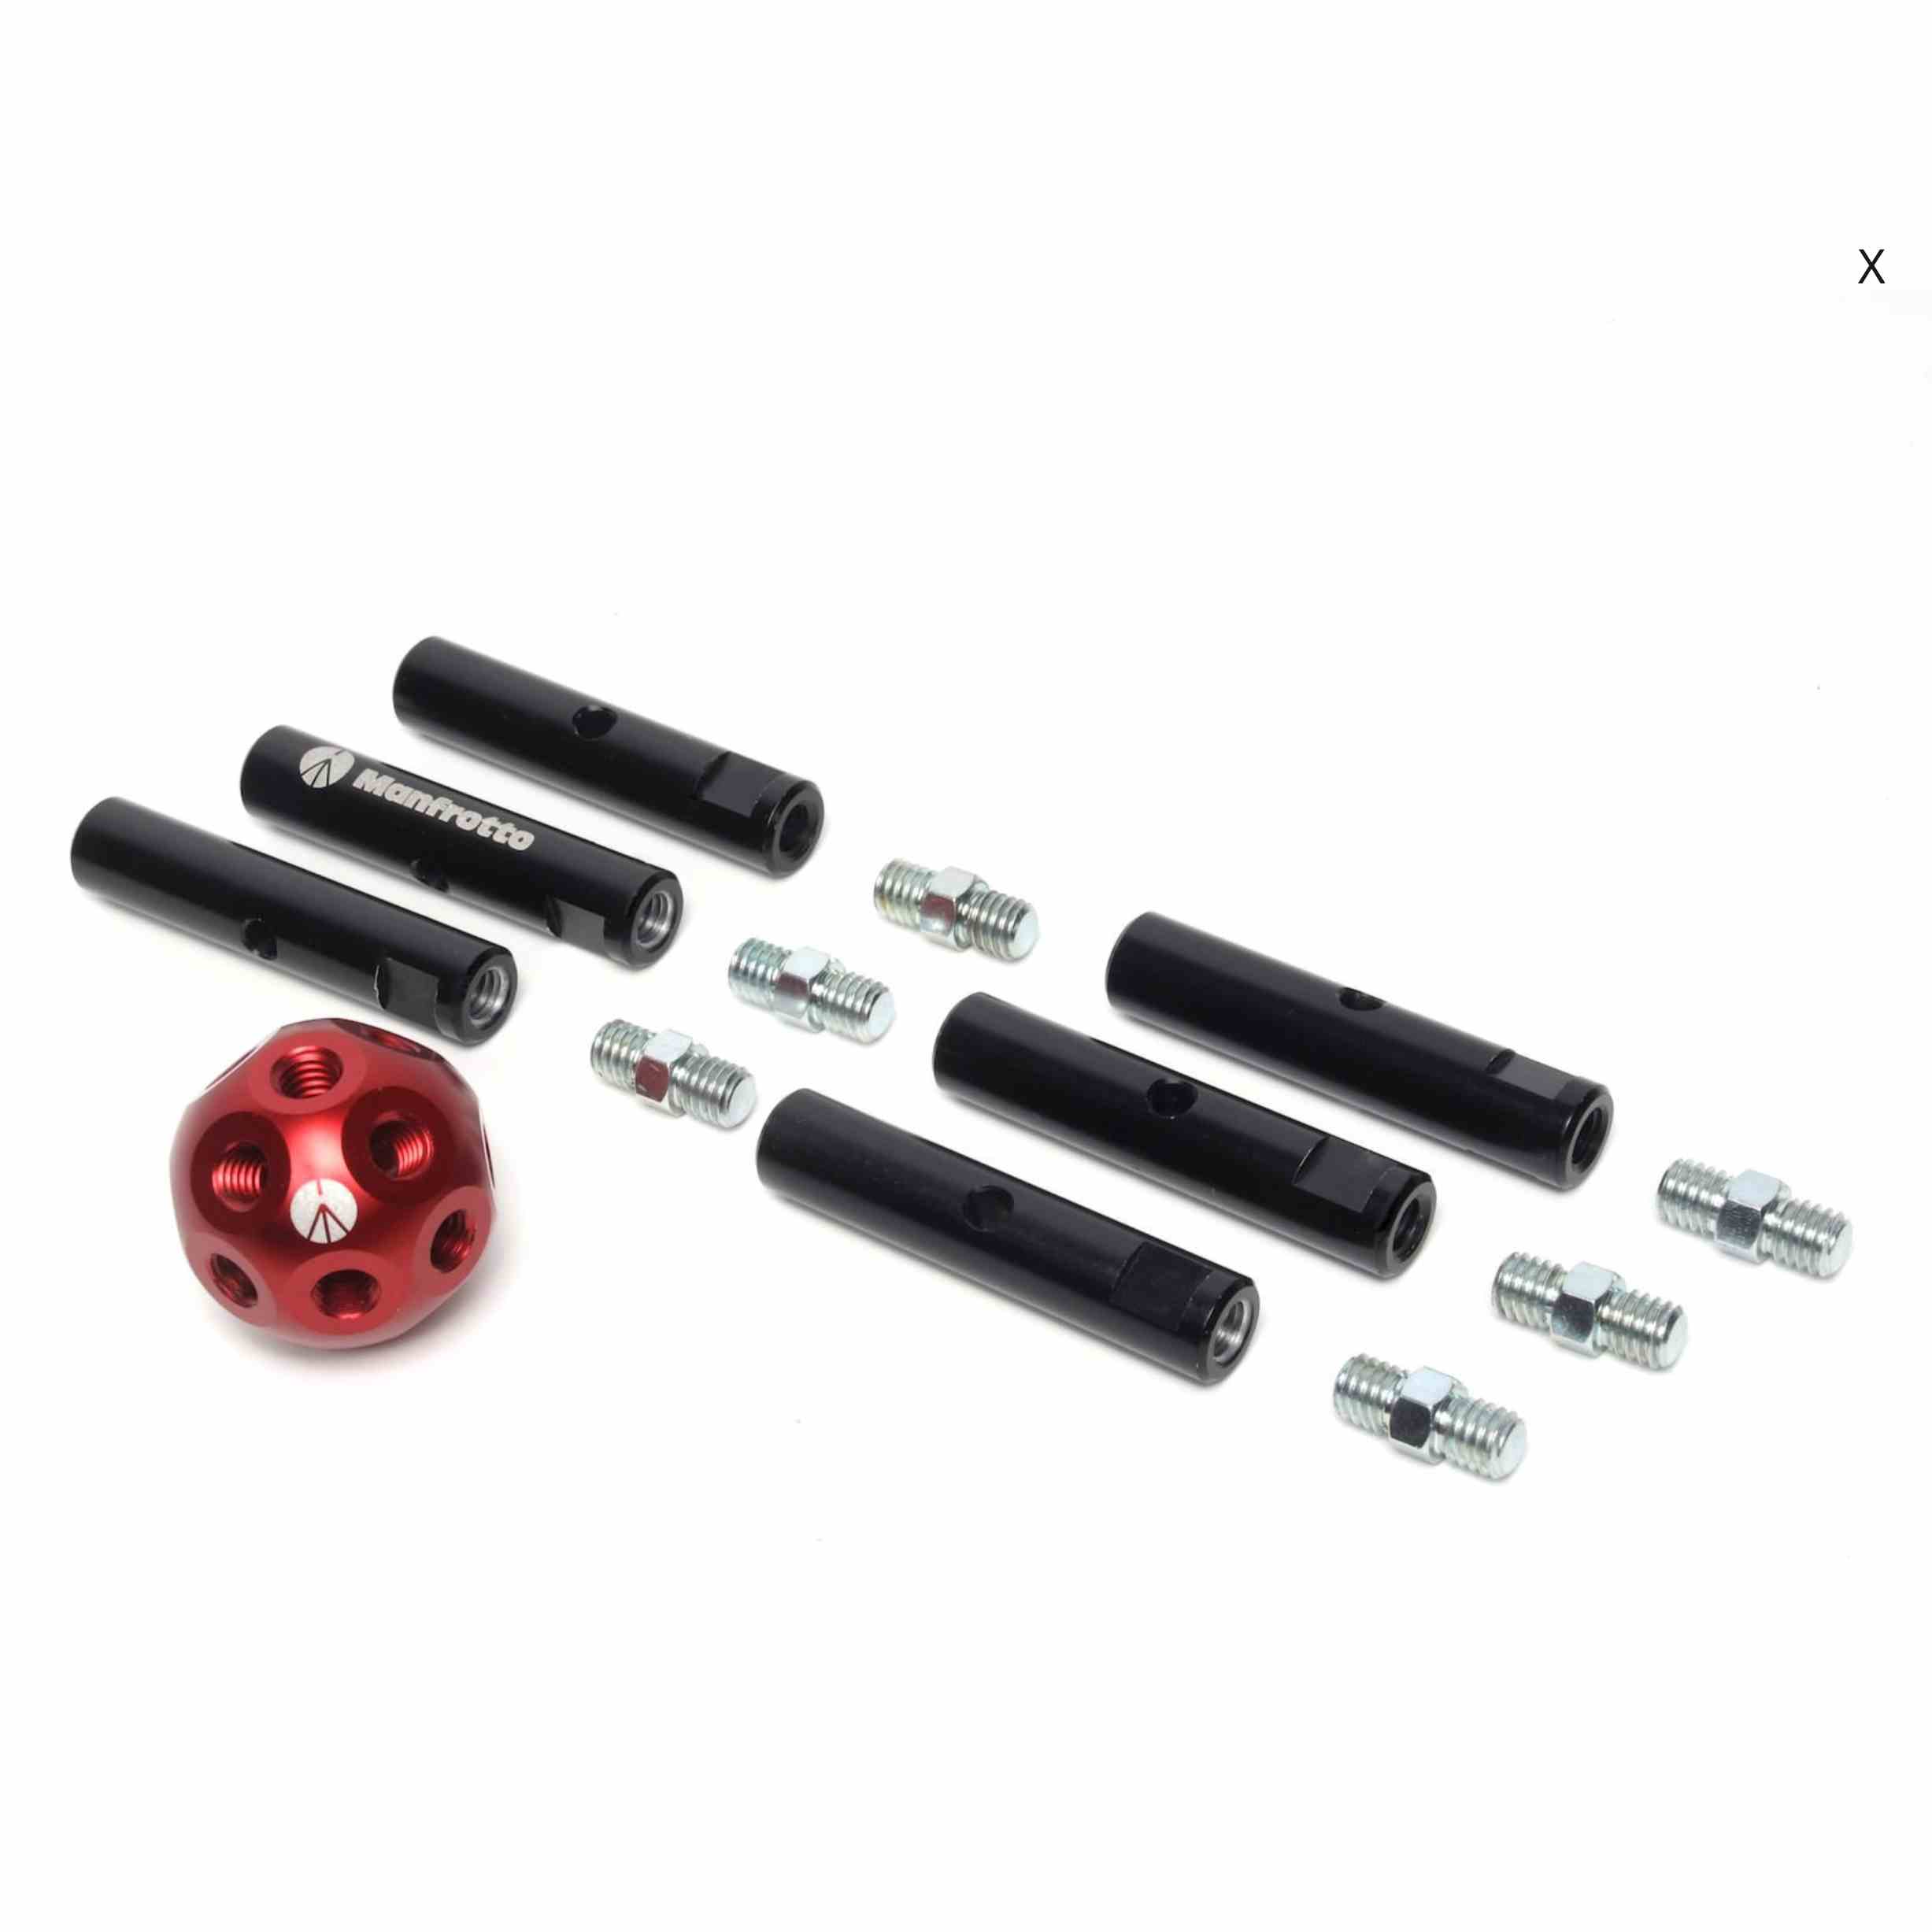 Manfrotto Universal Junction DADO kit